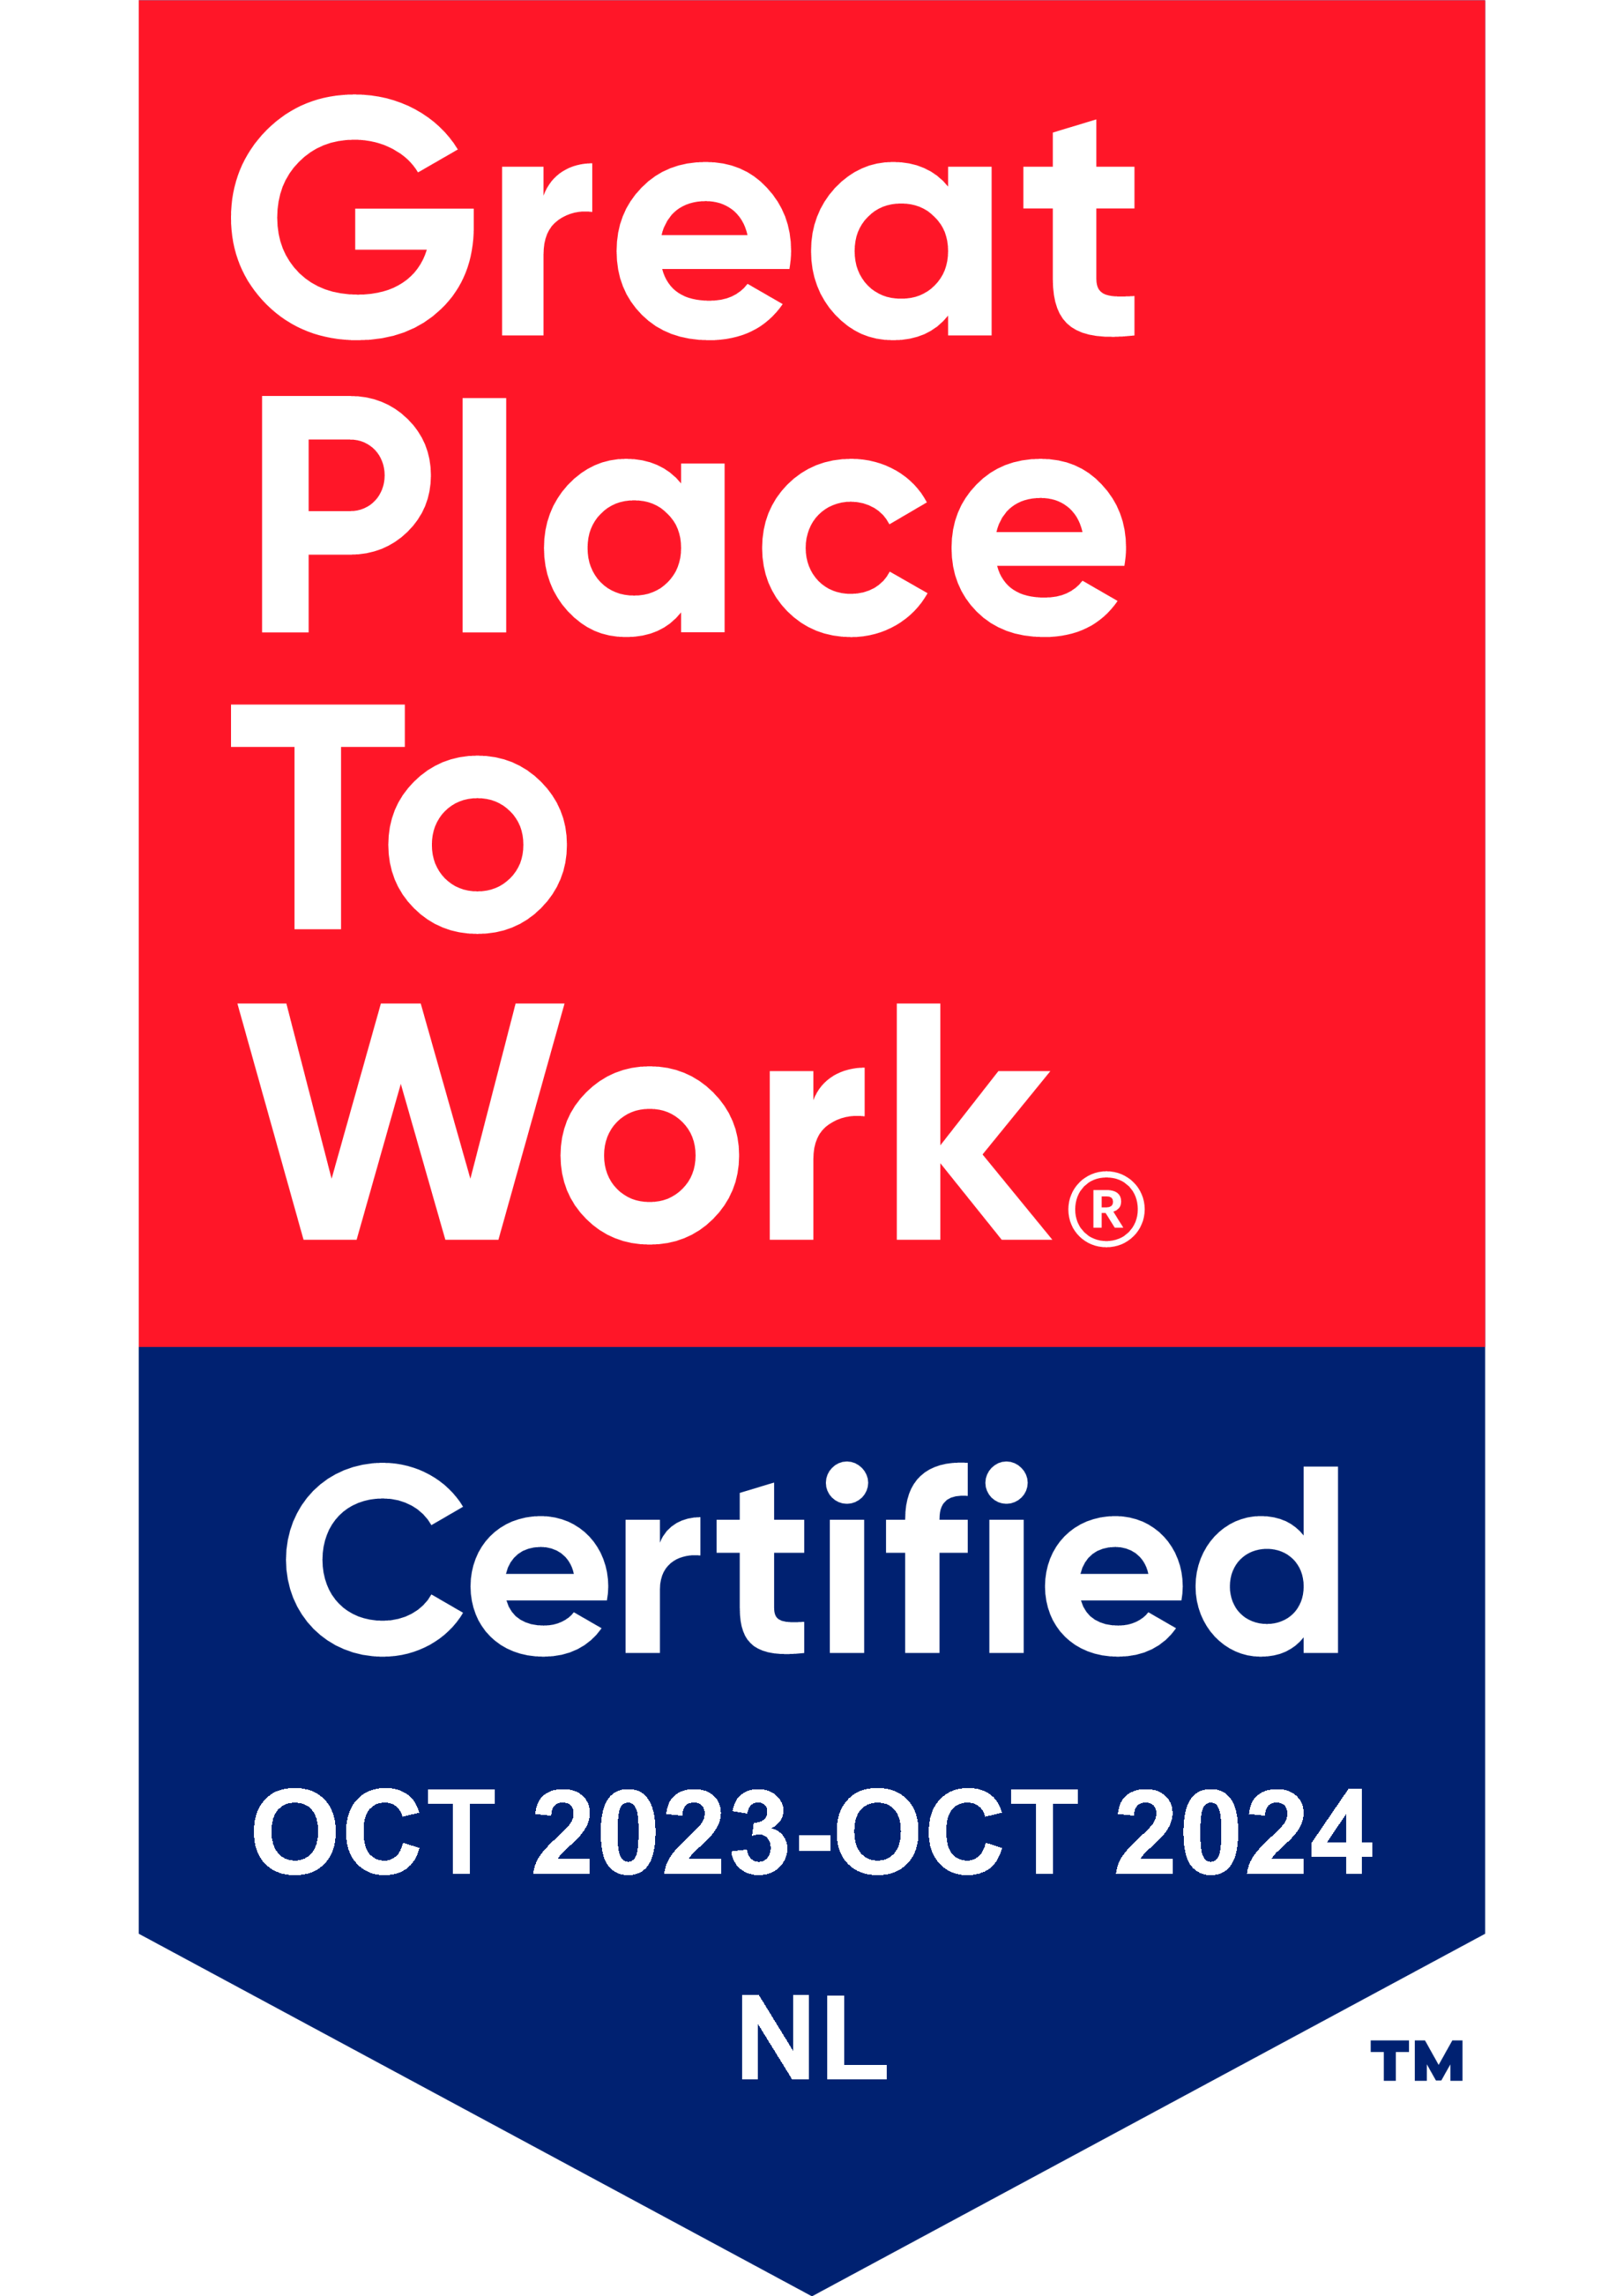 Great Place to work label - Certified OCT 2023-OCT2024